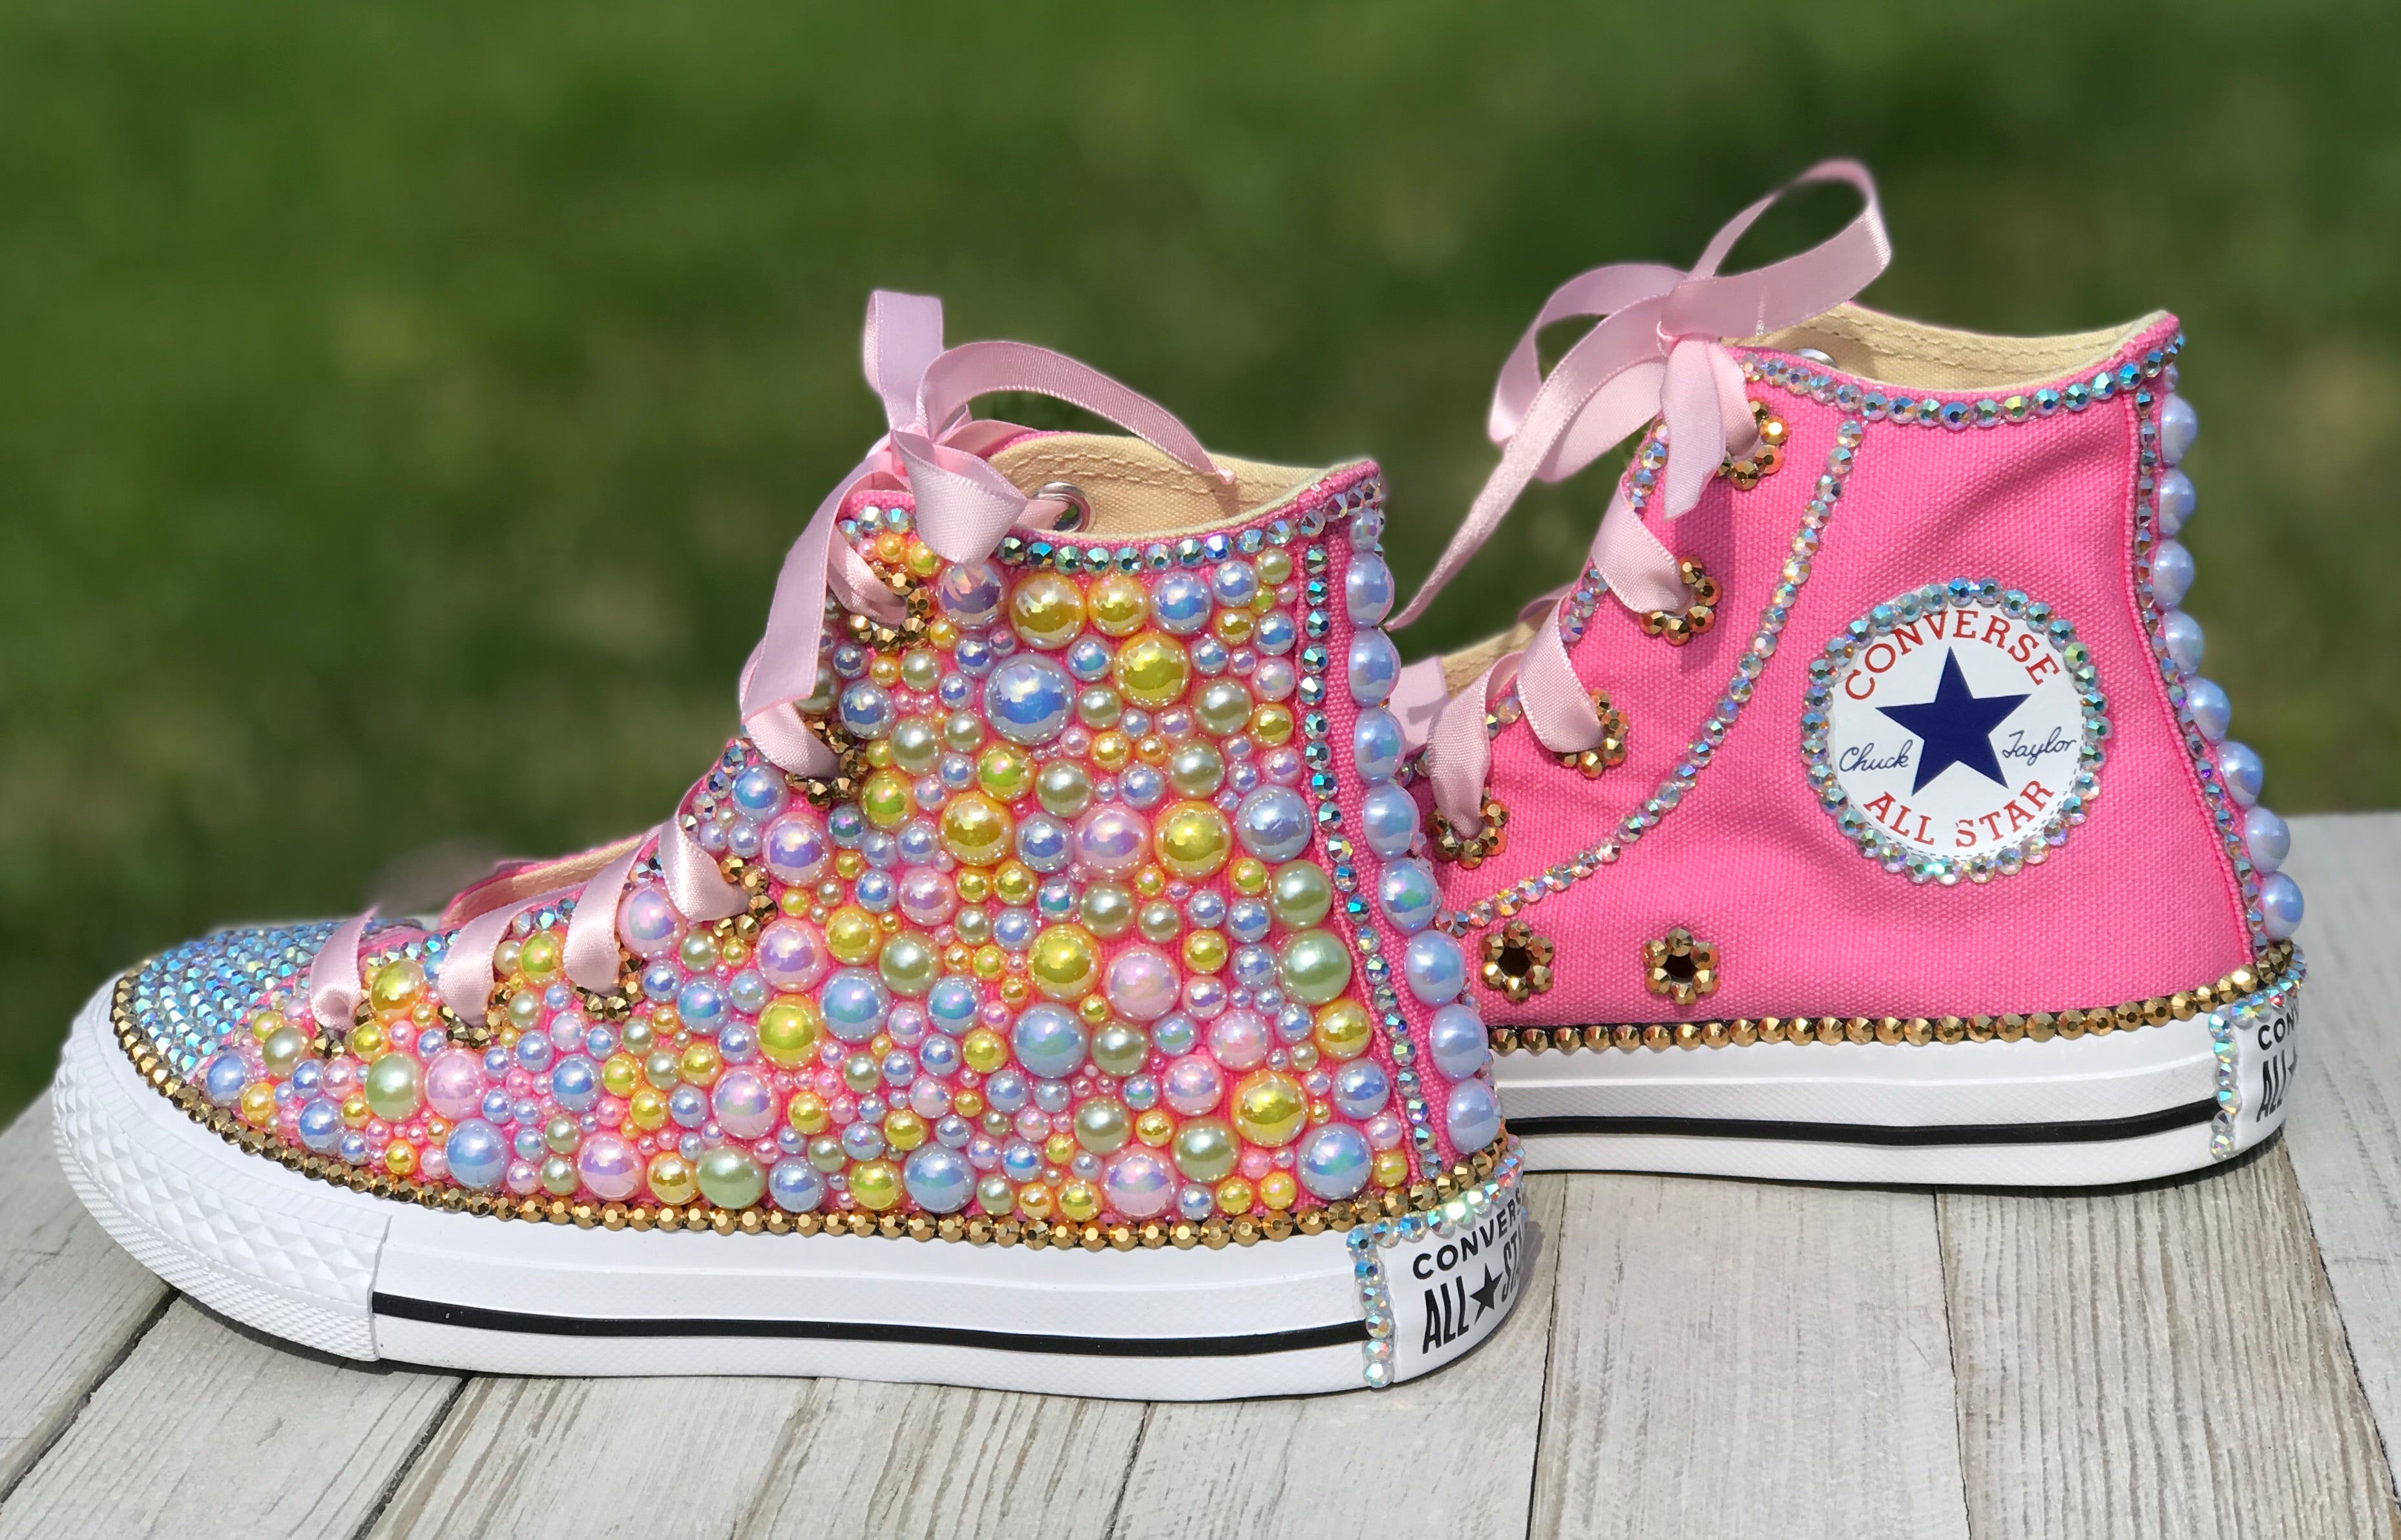 Pink Bedazzled Converse Sneakers | Little Ladybug Tutus